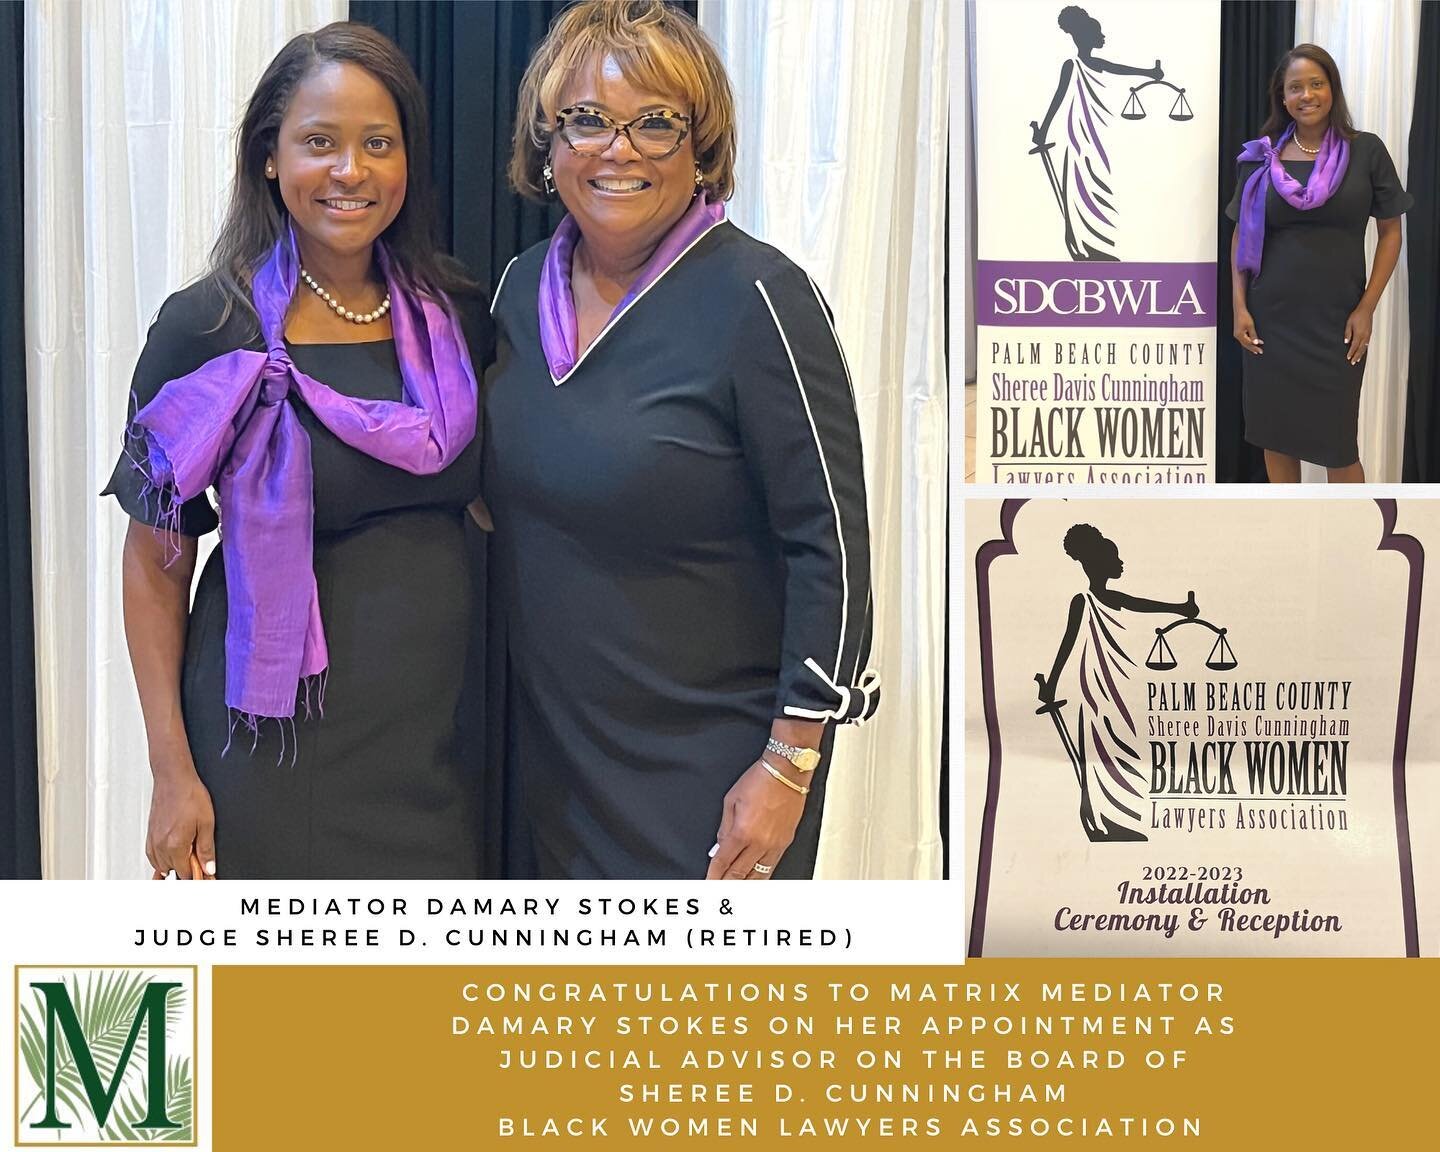 Congratulations to Matrix Mediator Damary Stokes on her appointment as Judicial Advisor on the Board of Palm Beach County Sheree Davis Cunningham Black Women Lawyers Association. 
#meditation #mediator #Lawyers